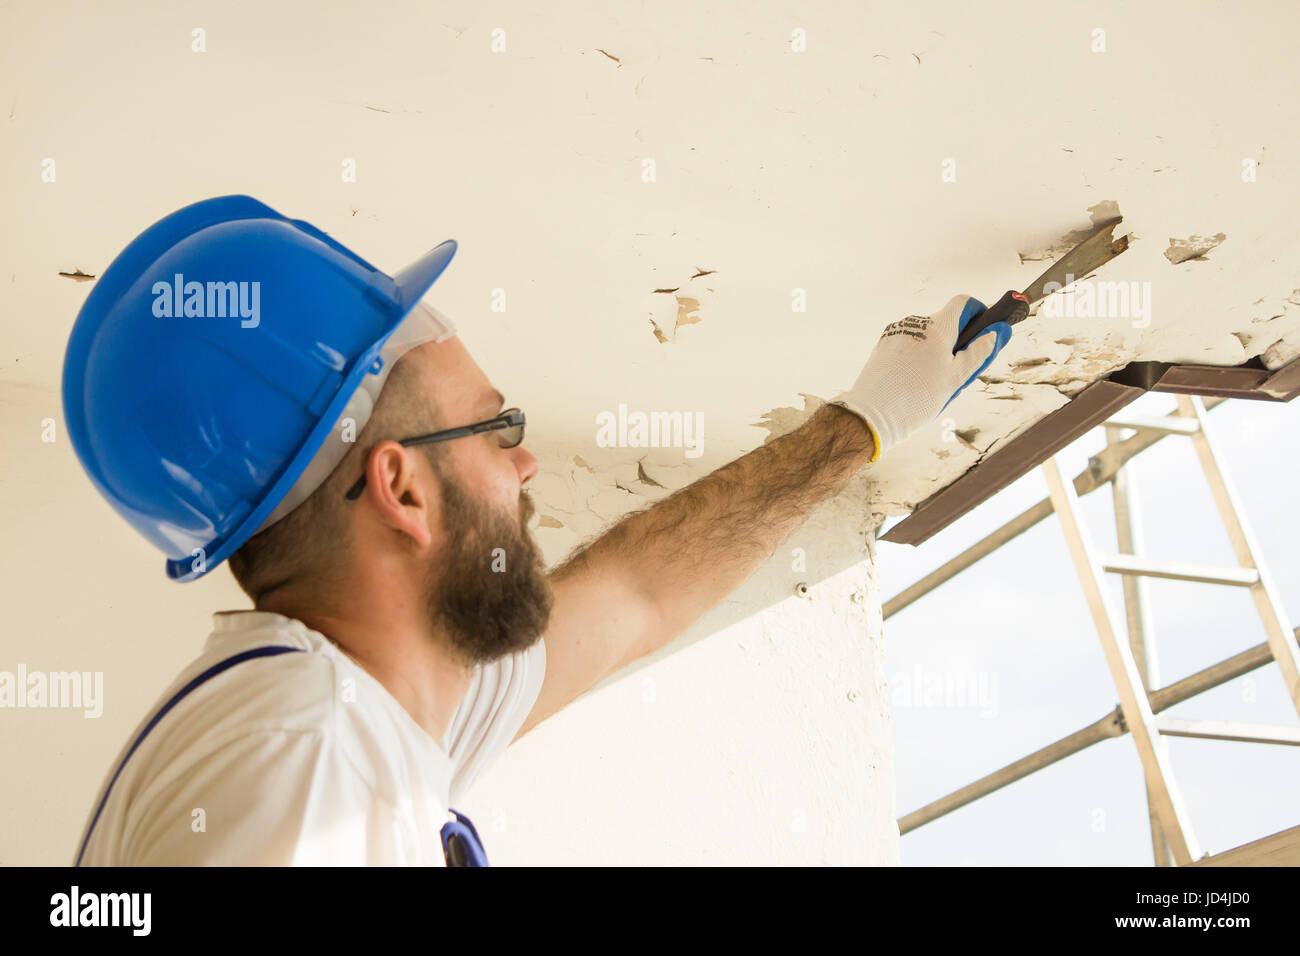 Construction worker in work attire, protective gloves and a helmet on site. Remove the old paint spatula from the ceiling. Stock Photo